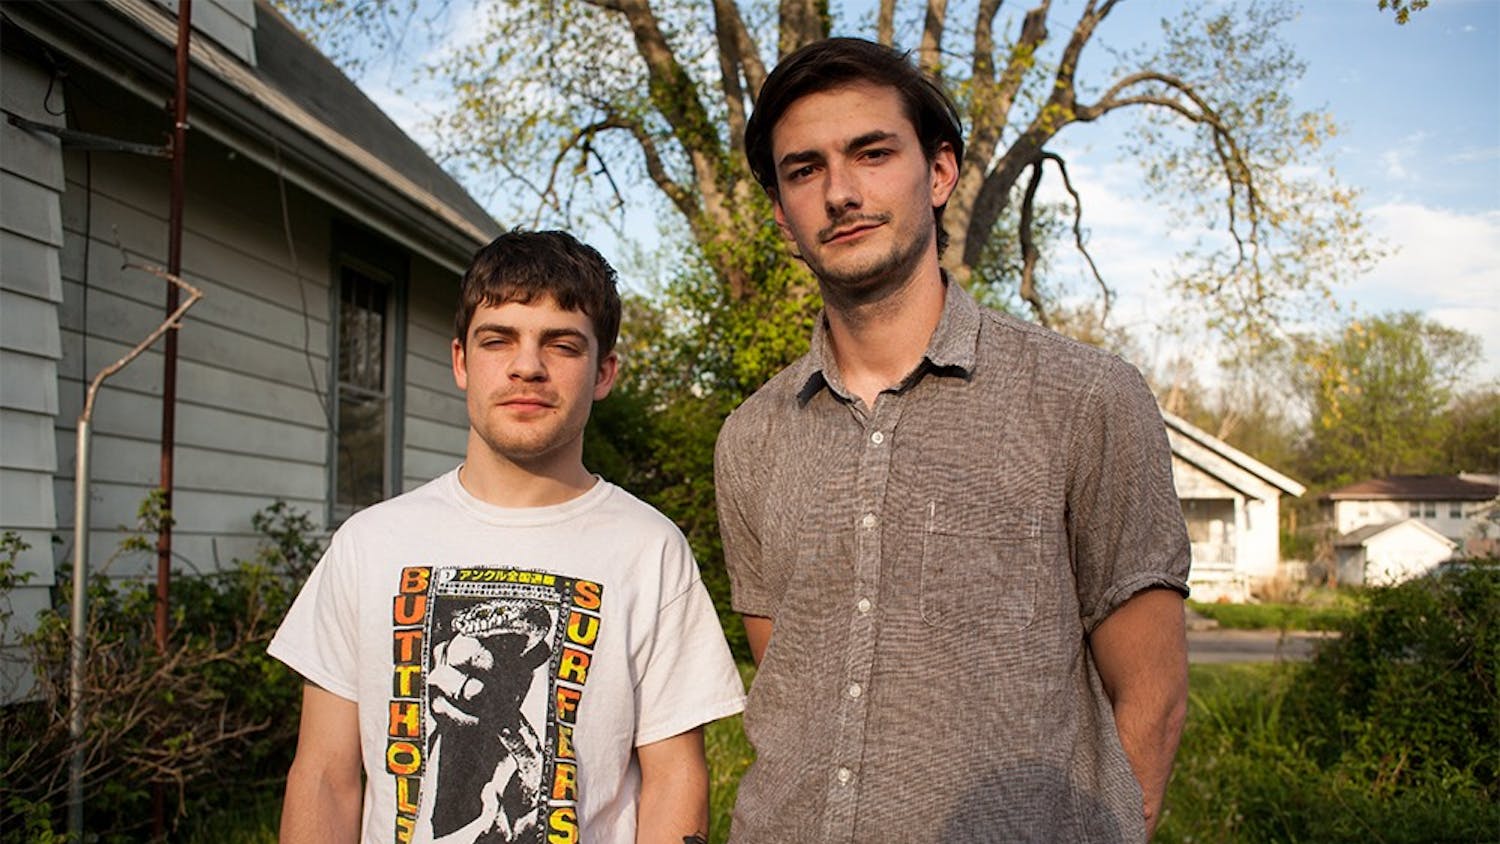 Bassist Zach Worcel, left, and vocalist and guitarist Wes Cook of the lo-fi psych band The Tourniquets. Their new album, "Hales Corner" was recorded in 2015 and will release this weekend at their record release show Saturday at the Blockhouse. 